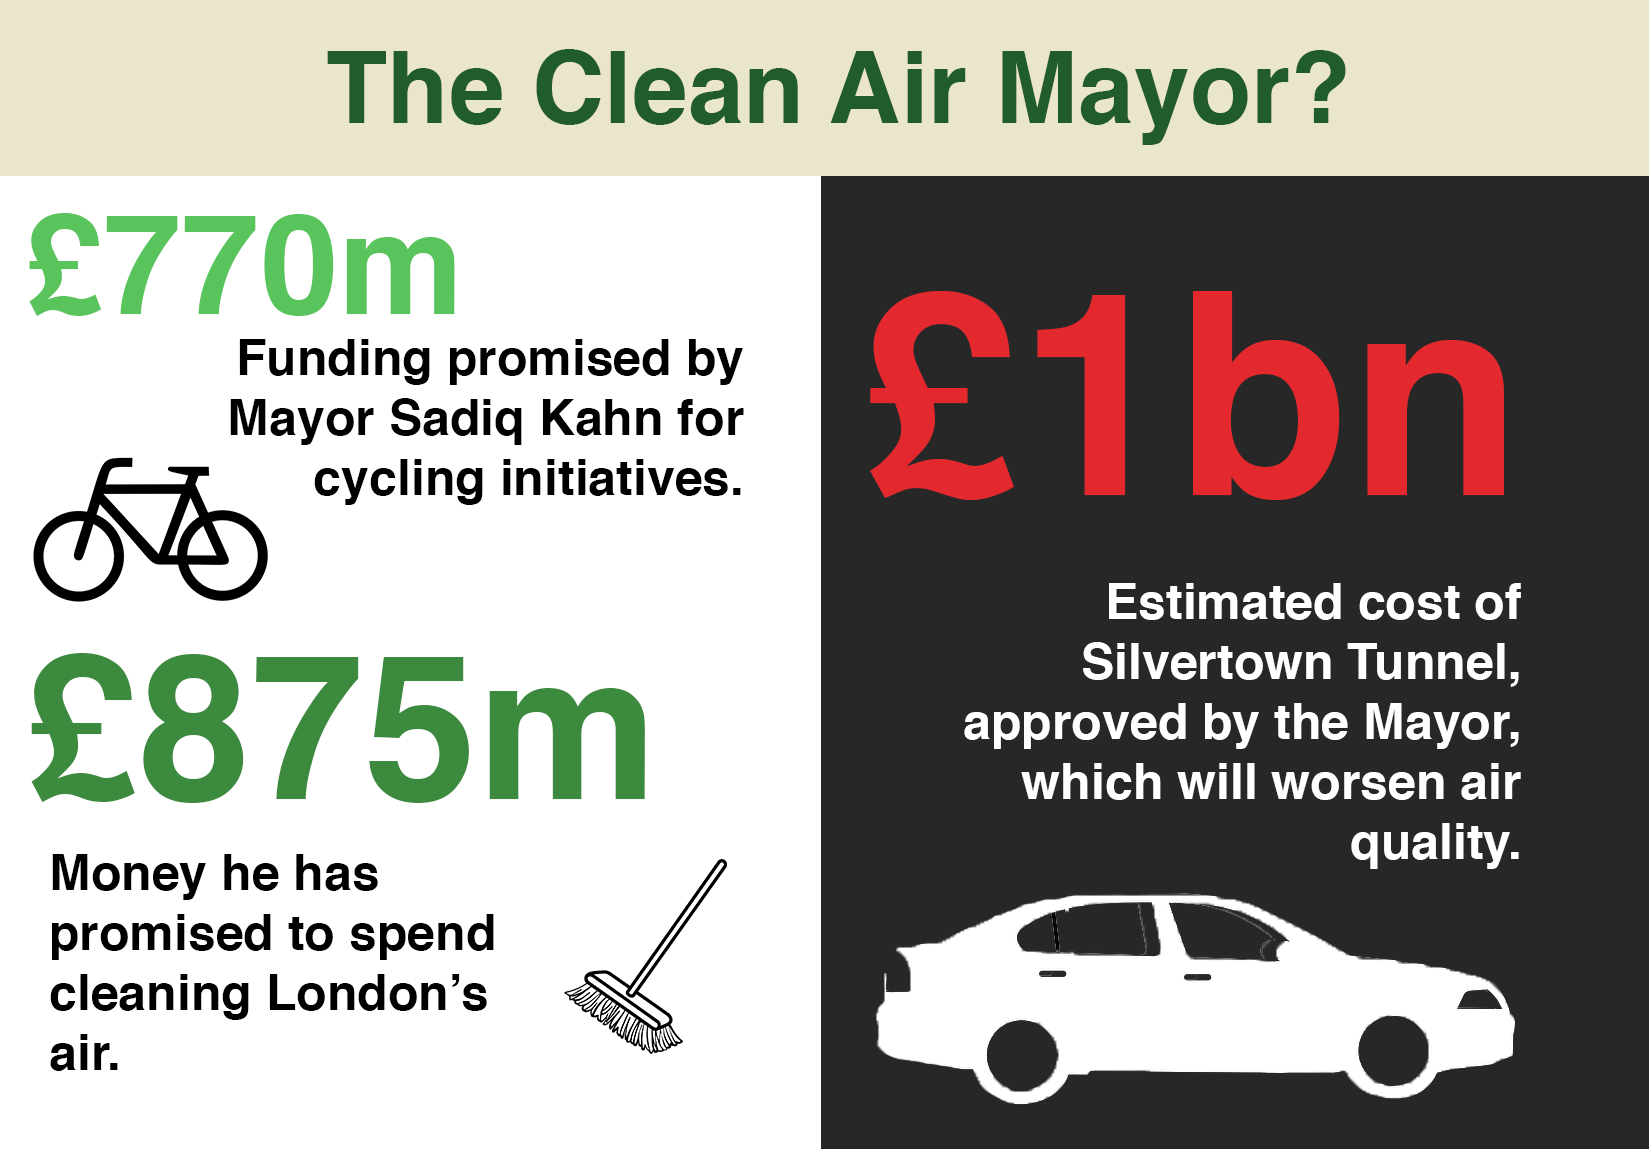 Spending by the Mayor of London Sadiq Kahn: £770m on cycling initiatives, £875m cleaning London's air, and £1bn on the heavily polluting Silvertown Tunnel